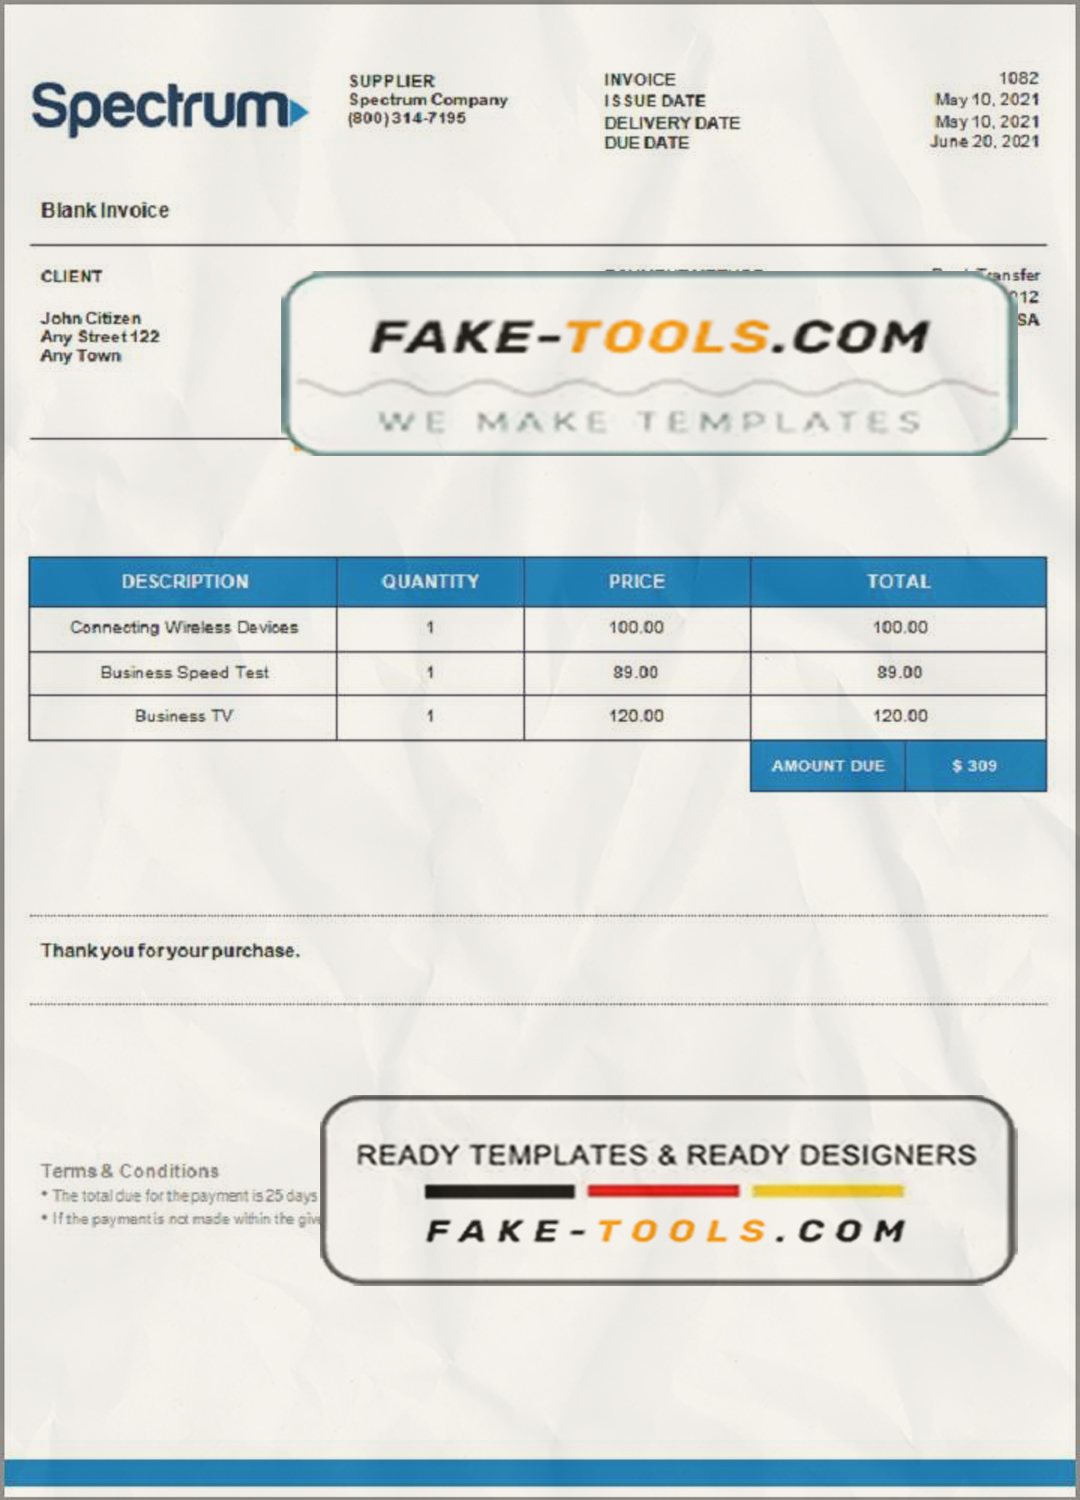 USA Spectrum invoice template in Word and PDF format, fully editable scan effect